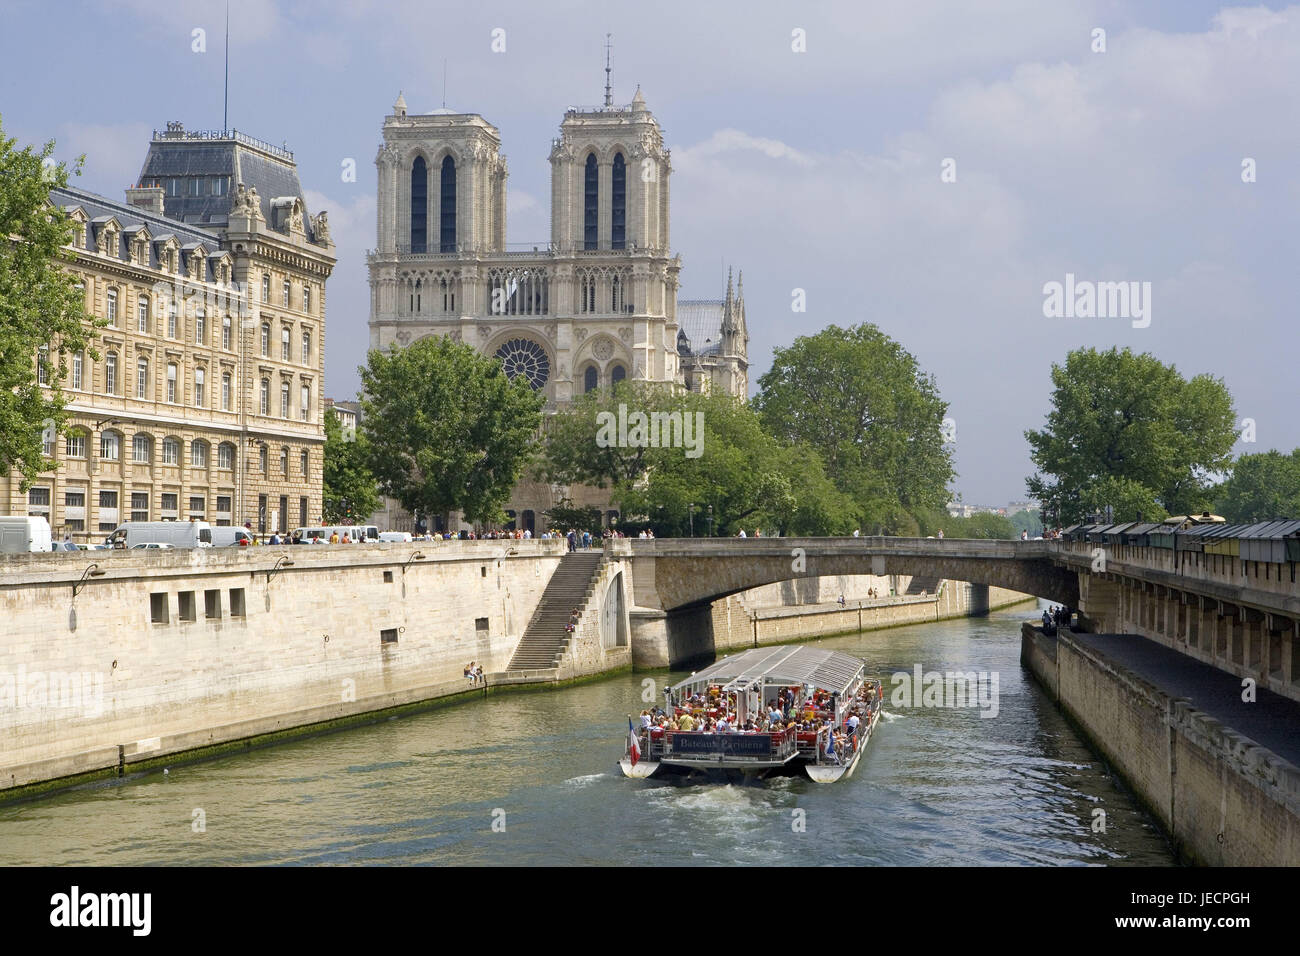 France, Paris, cathedral Notre lady, his, excursion boat, capital, church, structure, Gothic, sacred construction, Notre lady's cathedral, place of interest, landmark, river, boat, ship, riverboat journey, navigation, tourist, sightseeing, destination, tourism, city travel, Stock Photo